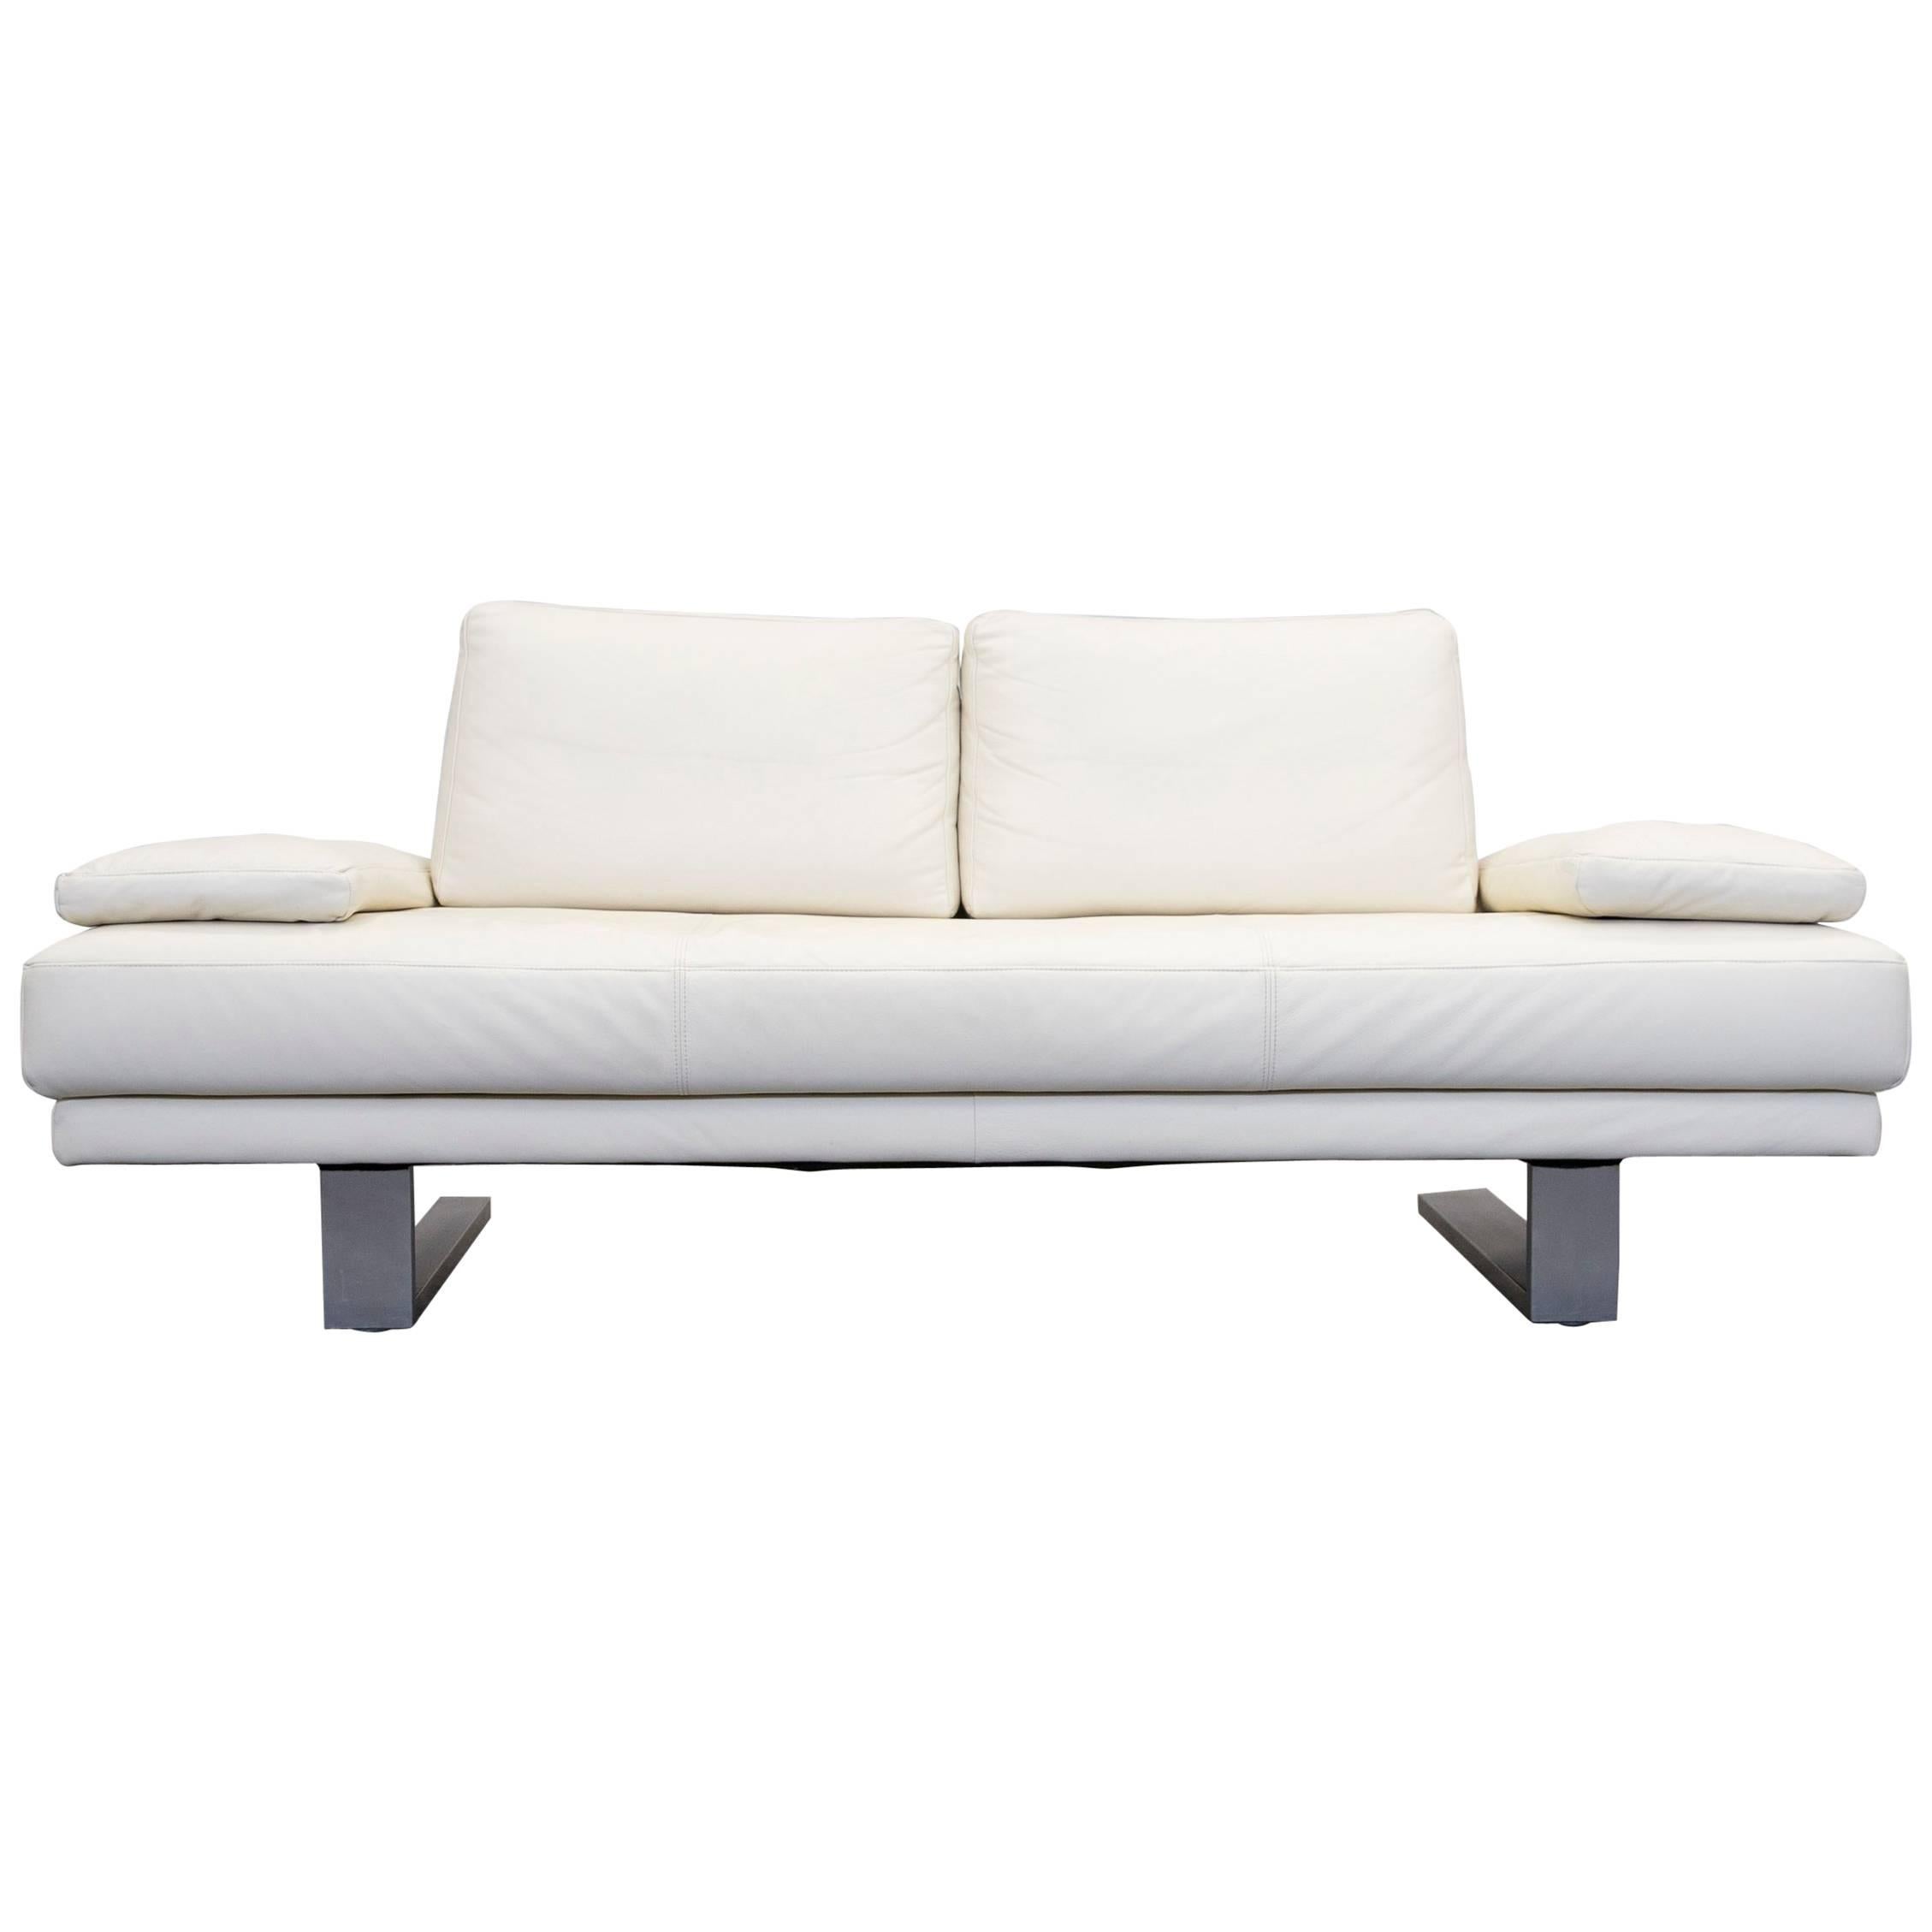 Rolf Benz 6600 Leather Sofa Cream White Two-Seat Modern For Sale